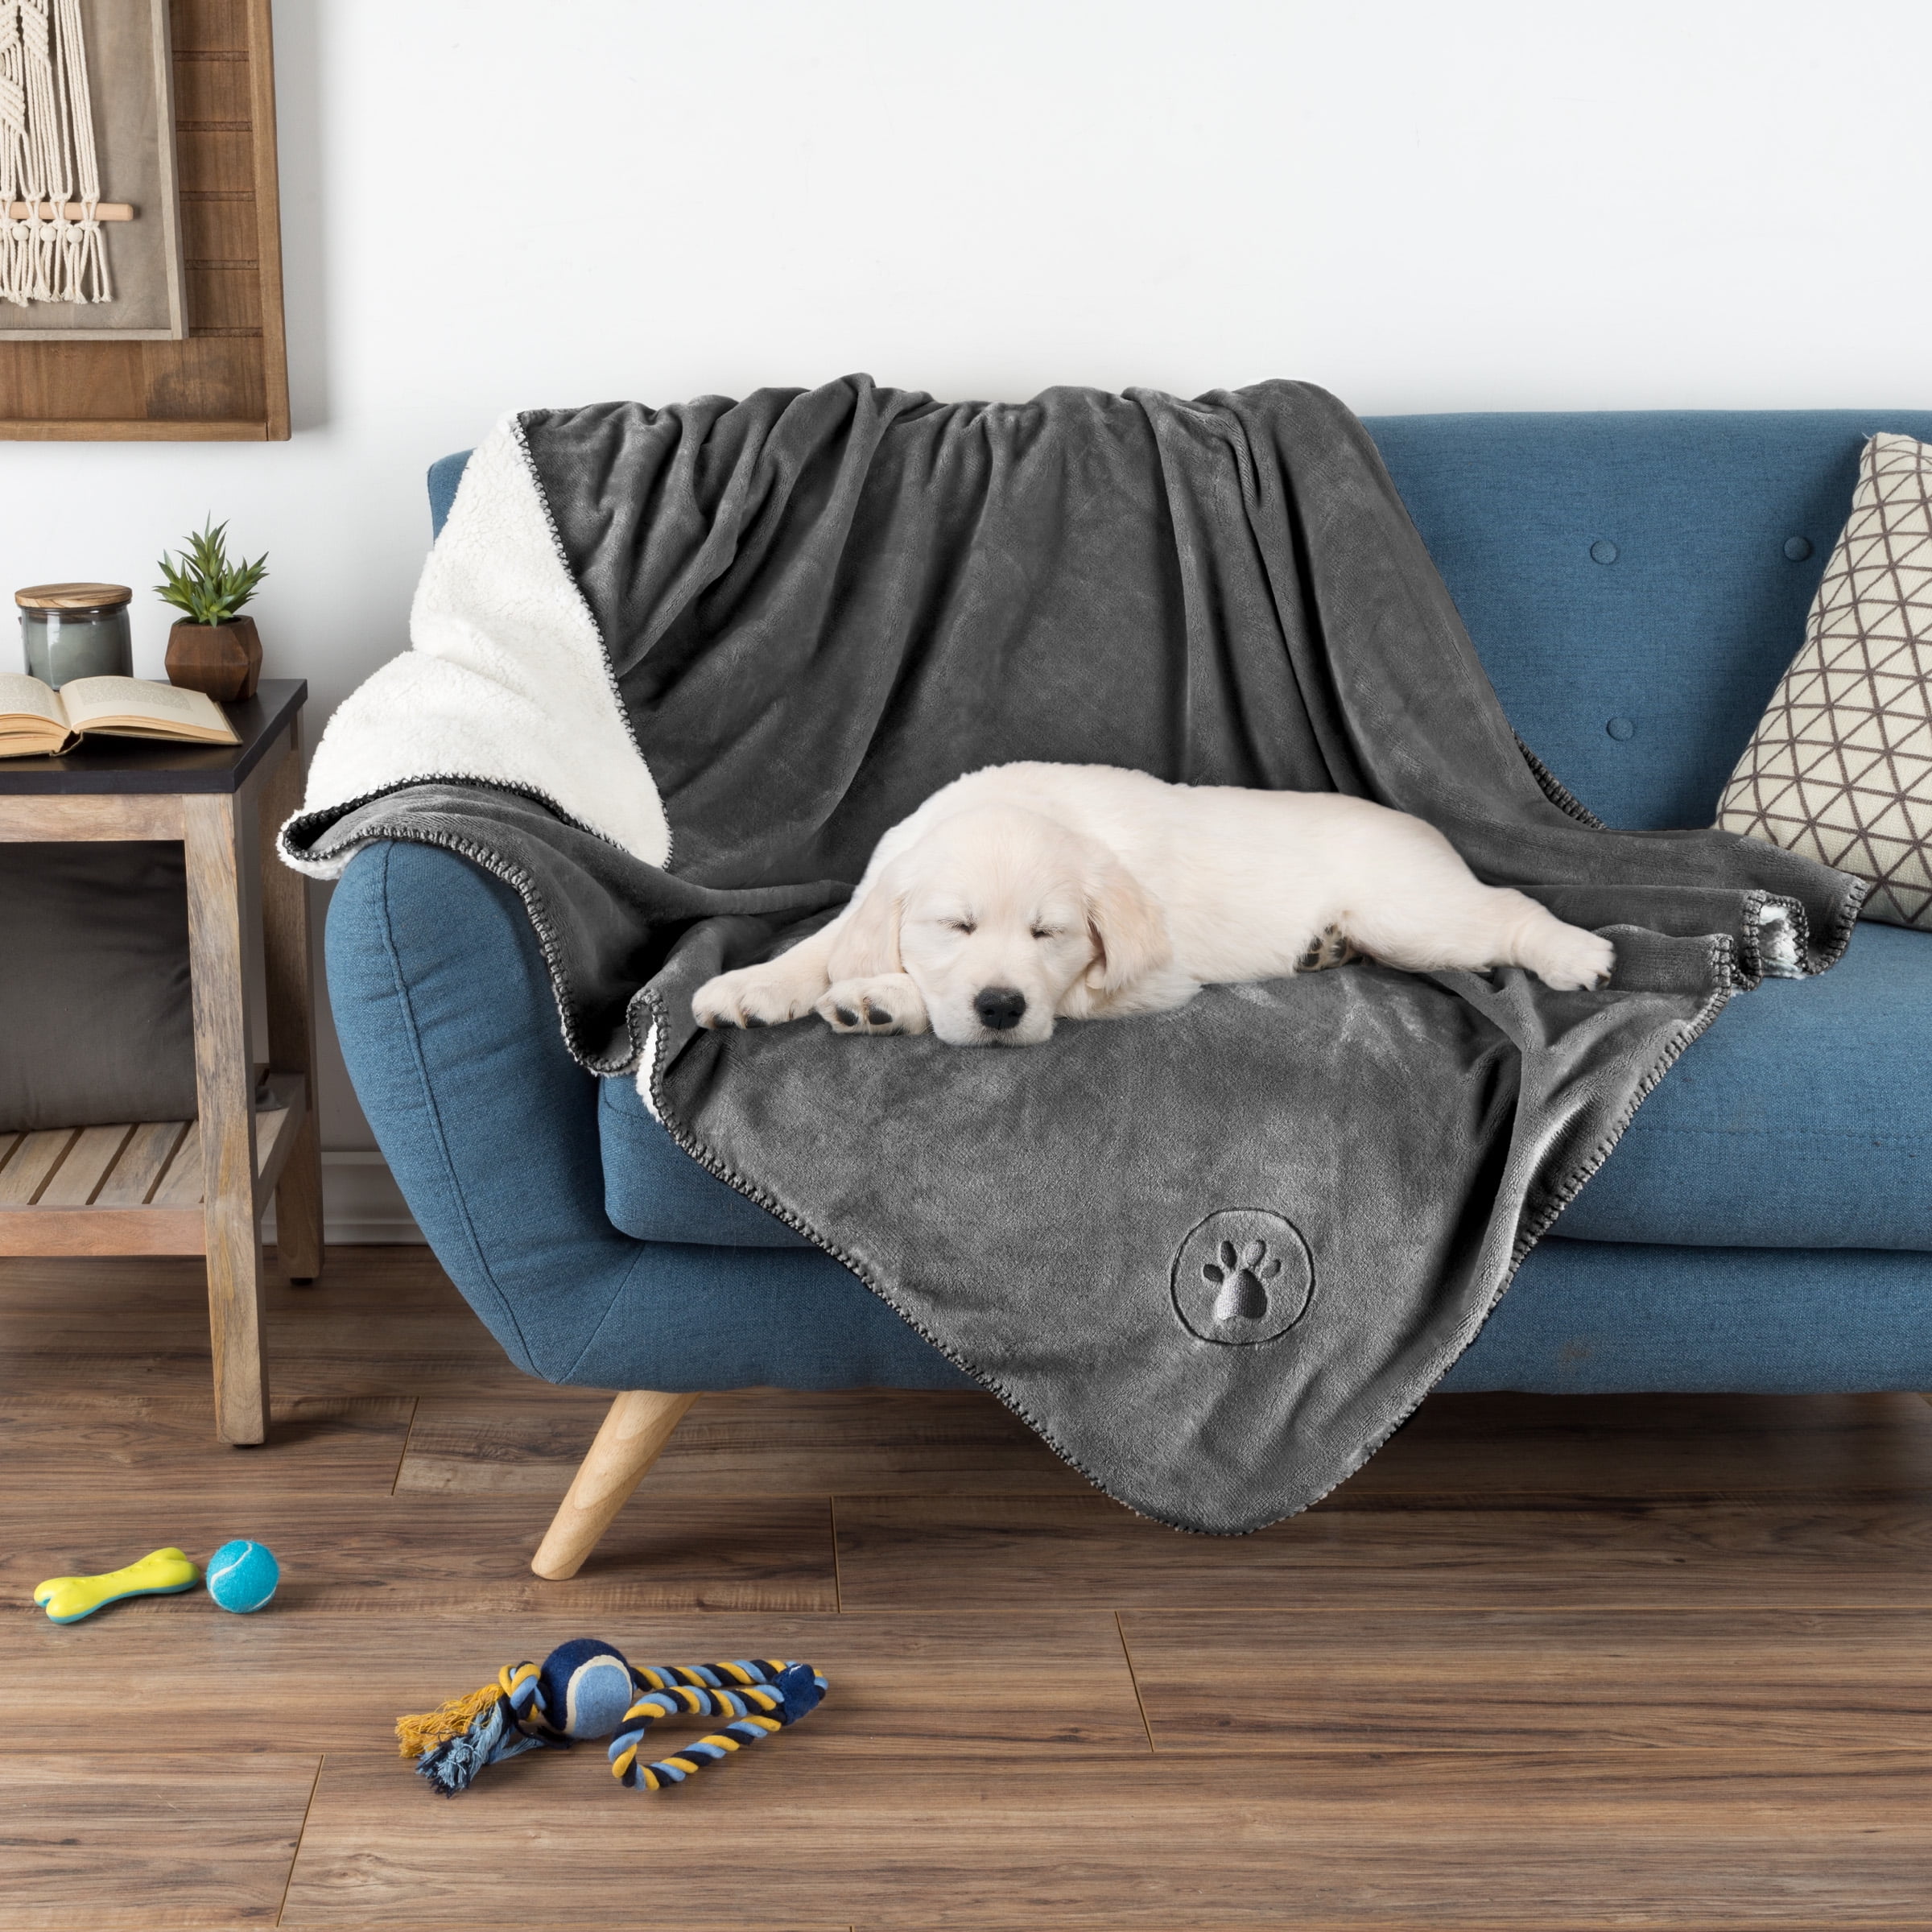 Waterproof Pet Blanket Reversible 50x60 Throw Protects Couch, Car, and